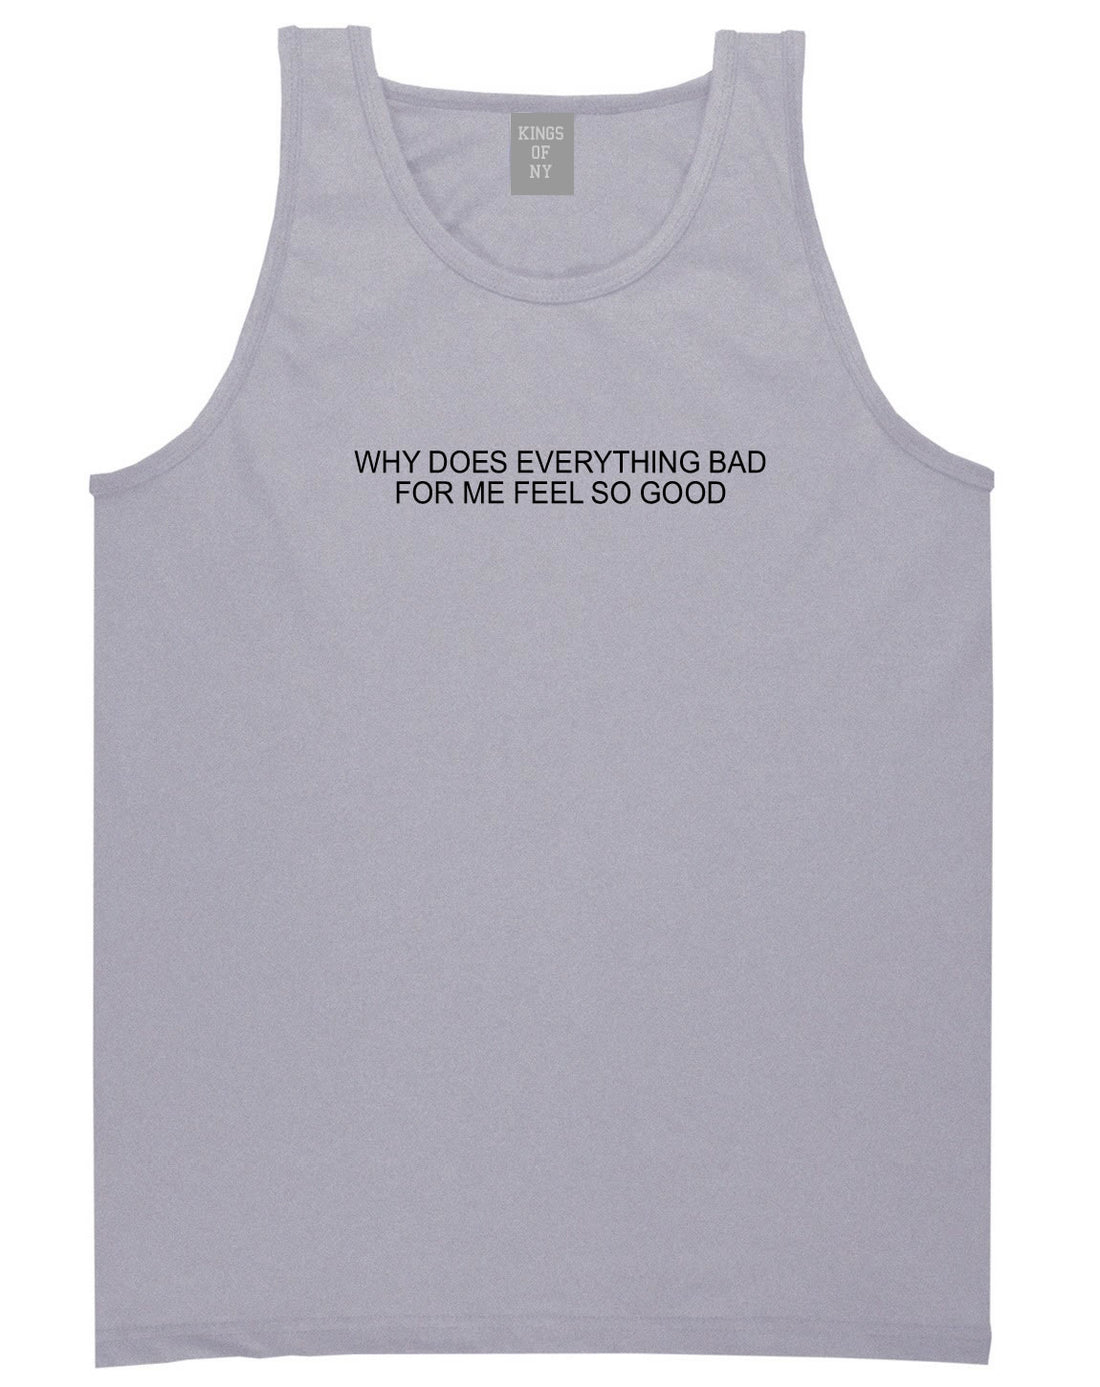 Why Does Everything Bad For Me Feel So Good Mens Tank Top Shirt Grey